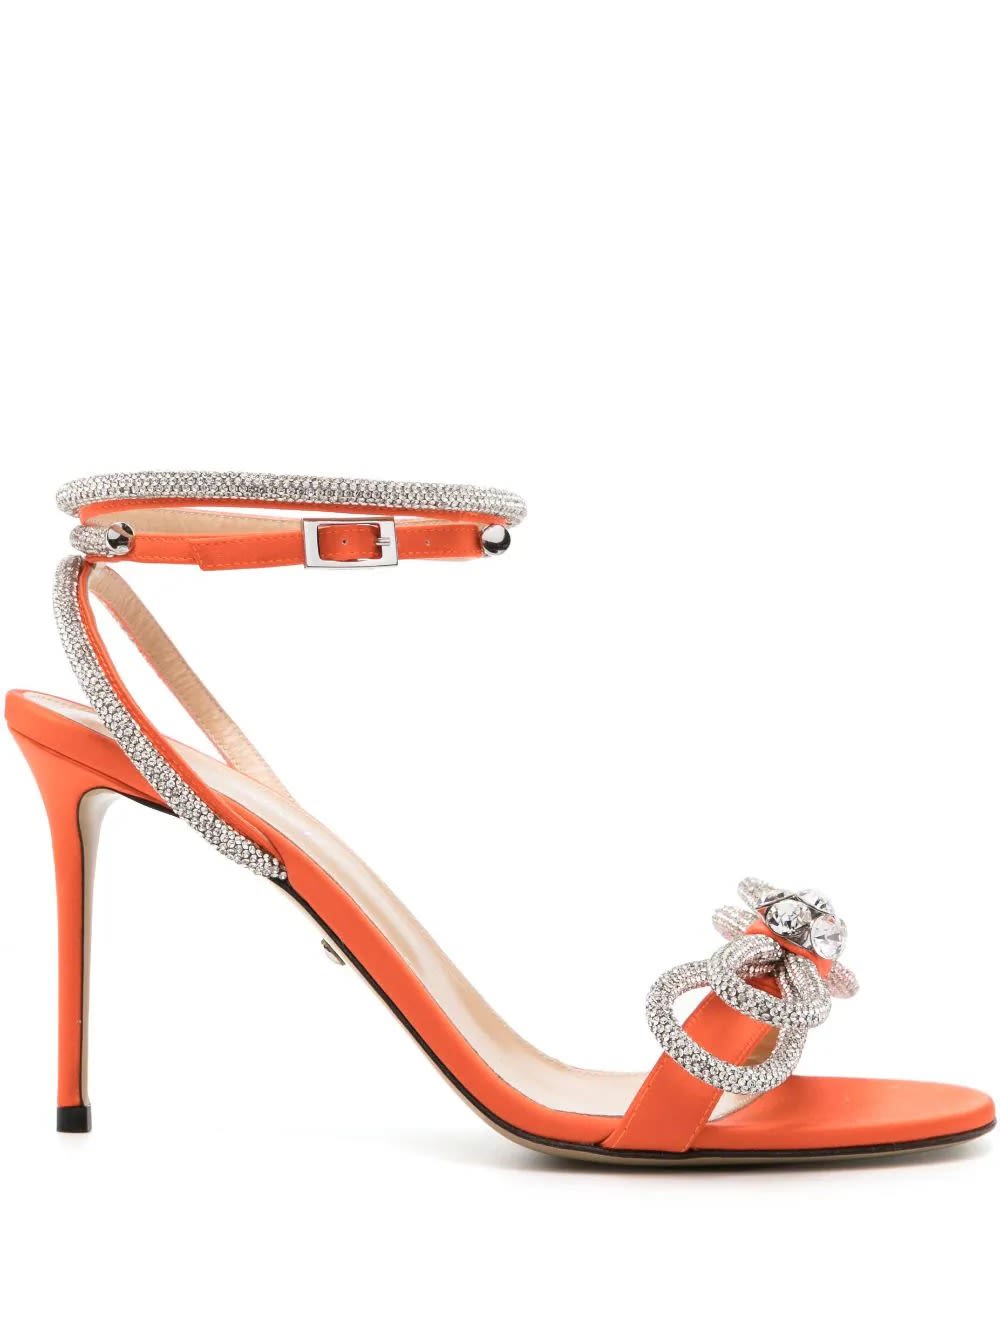 Double Bow 95 Mm Sandals In Orange Satin With Crystals